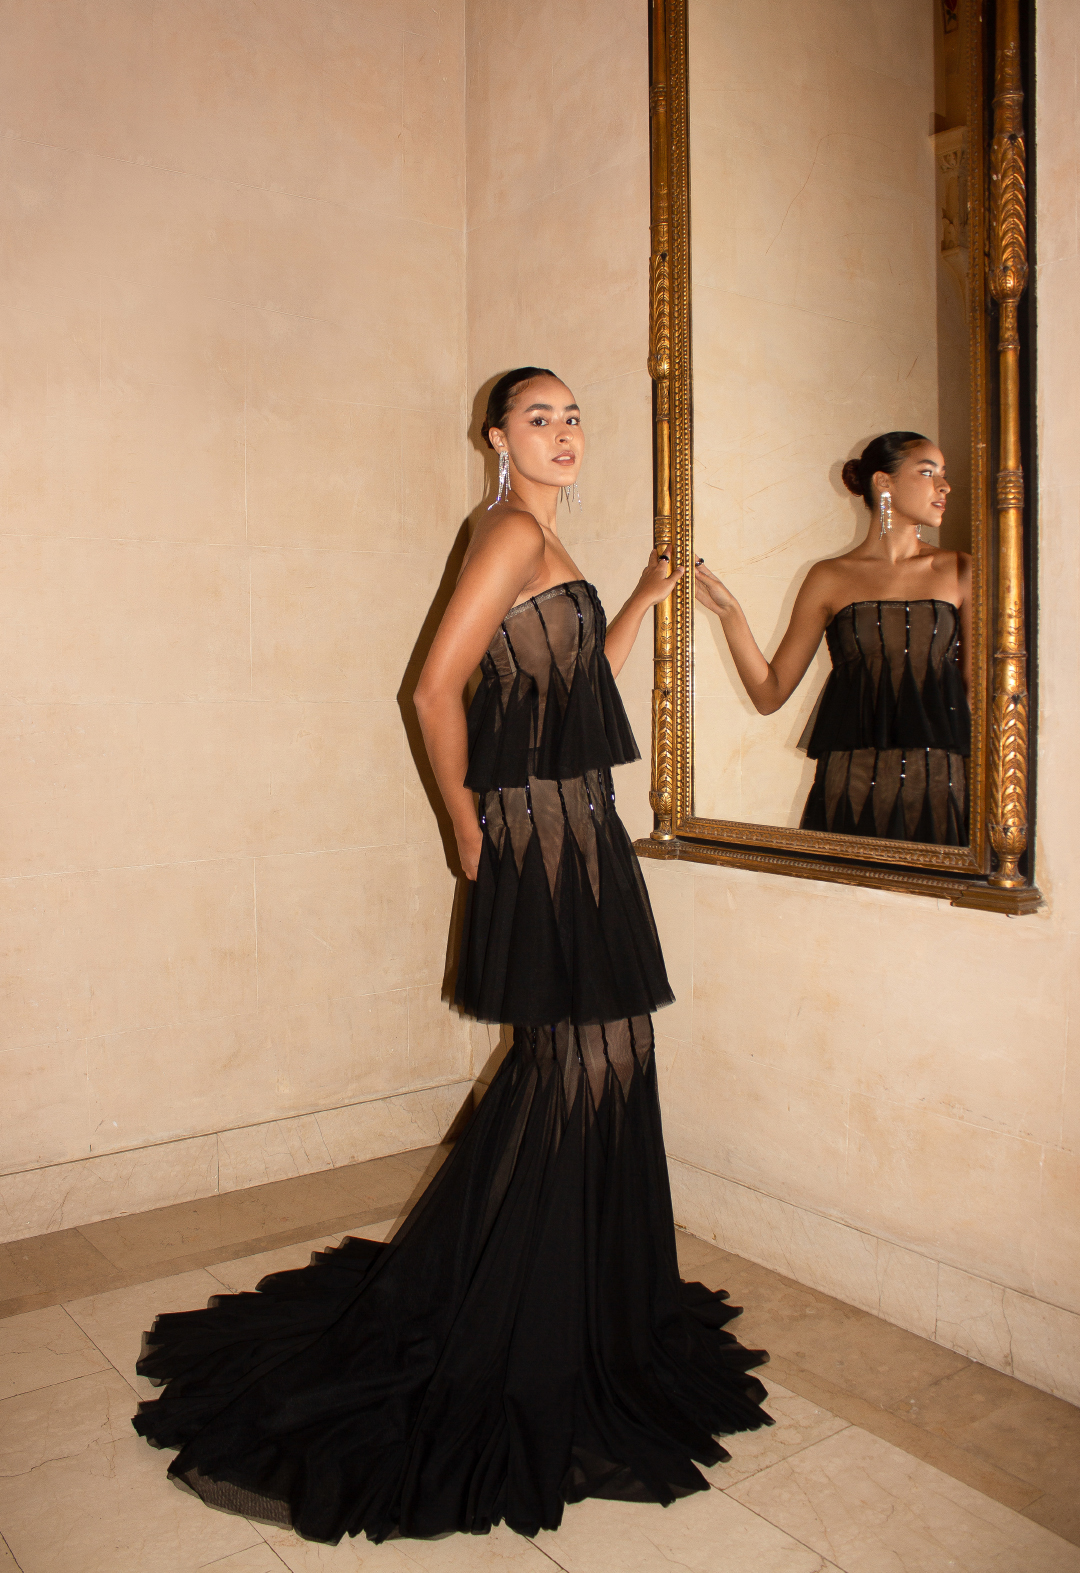 This tiered gown is made in black mesh fabric. In this image, the model is standing in front of a gold-framed mirror and looking into the camera. 